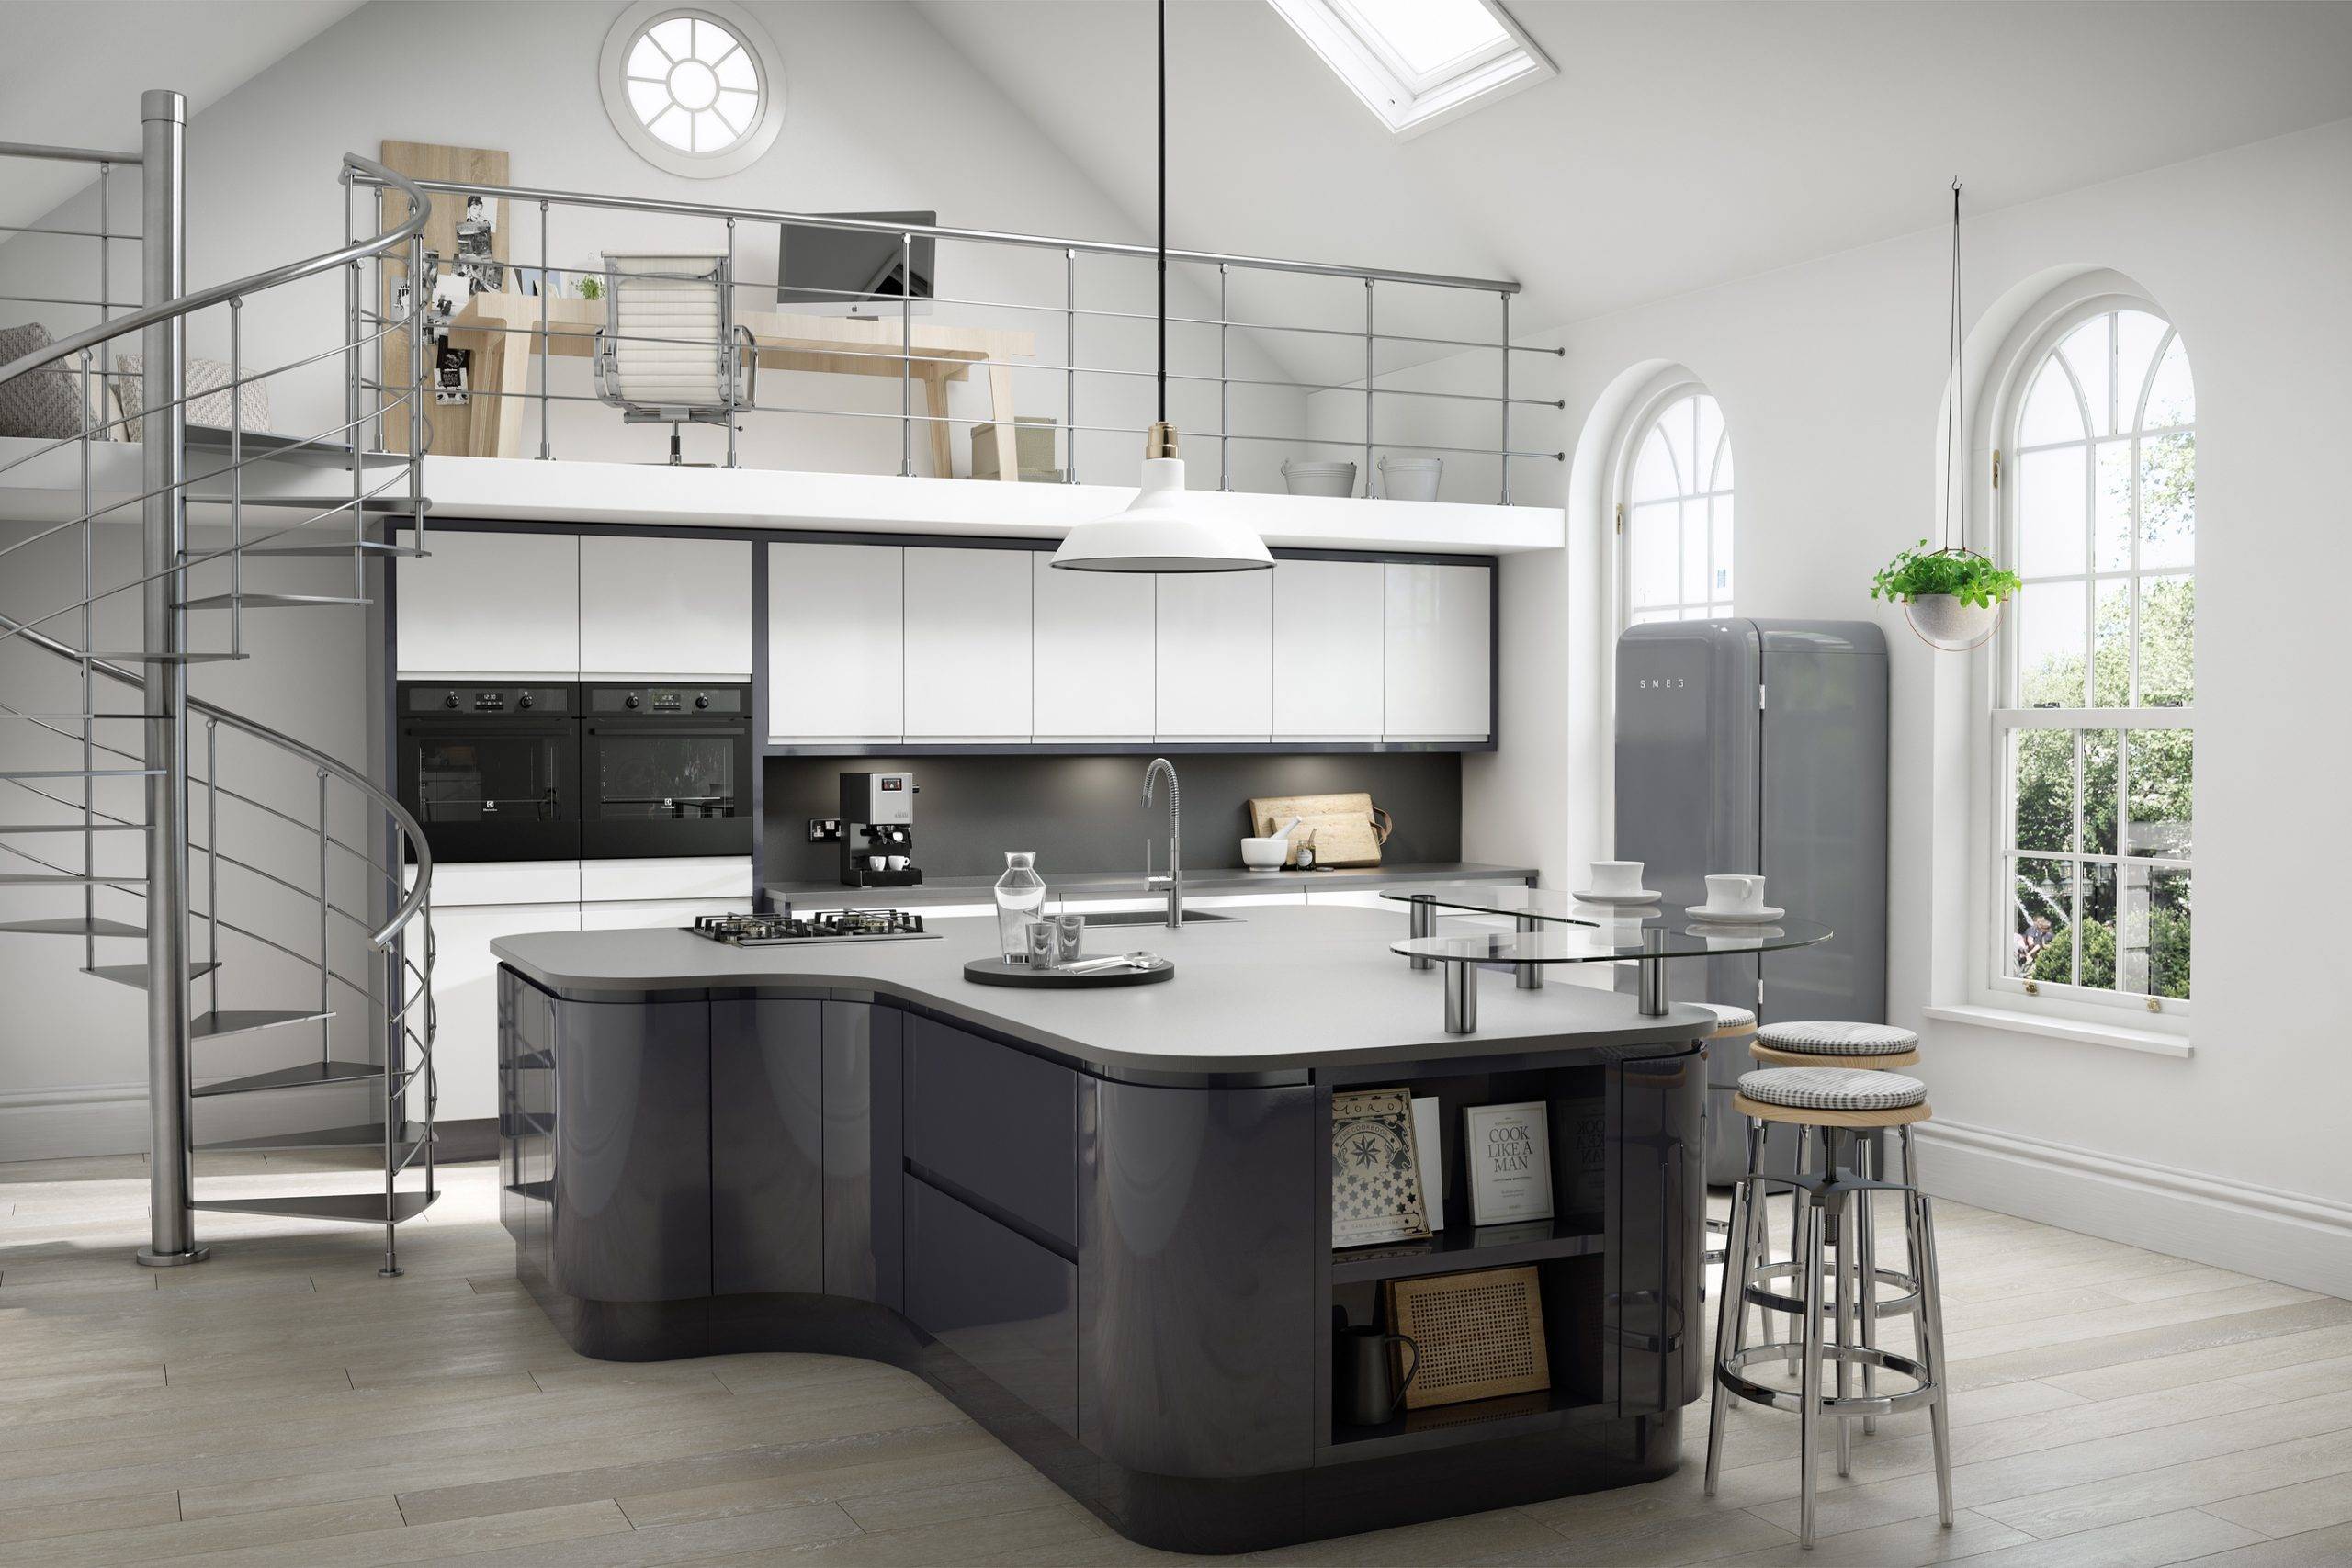 Solo Gloss Anthracite 1 | Net Kitchens, Walthamstow